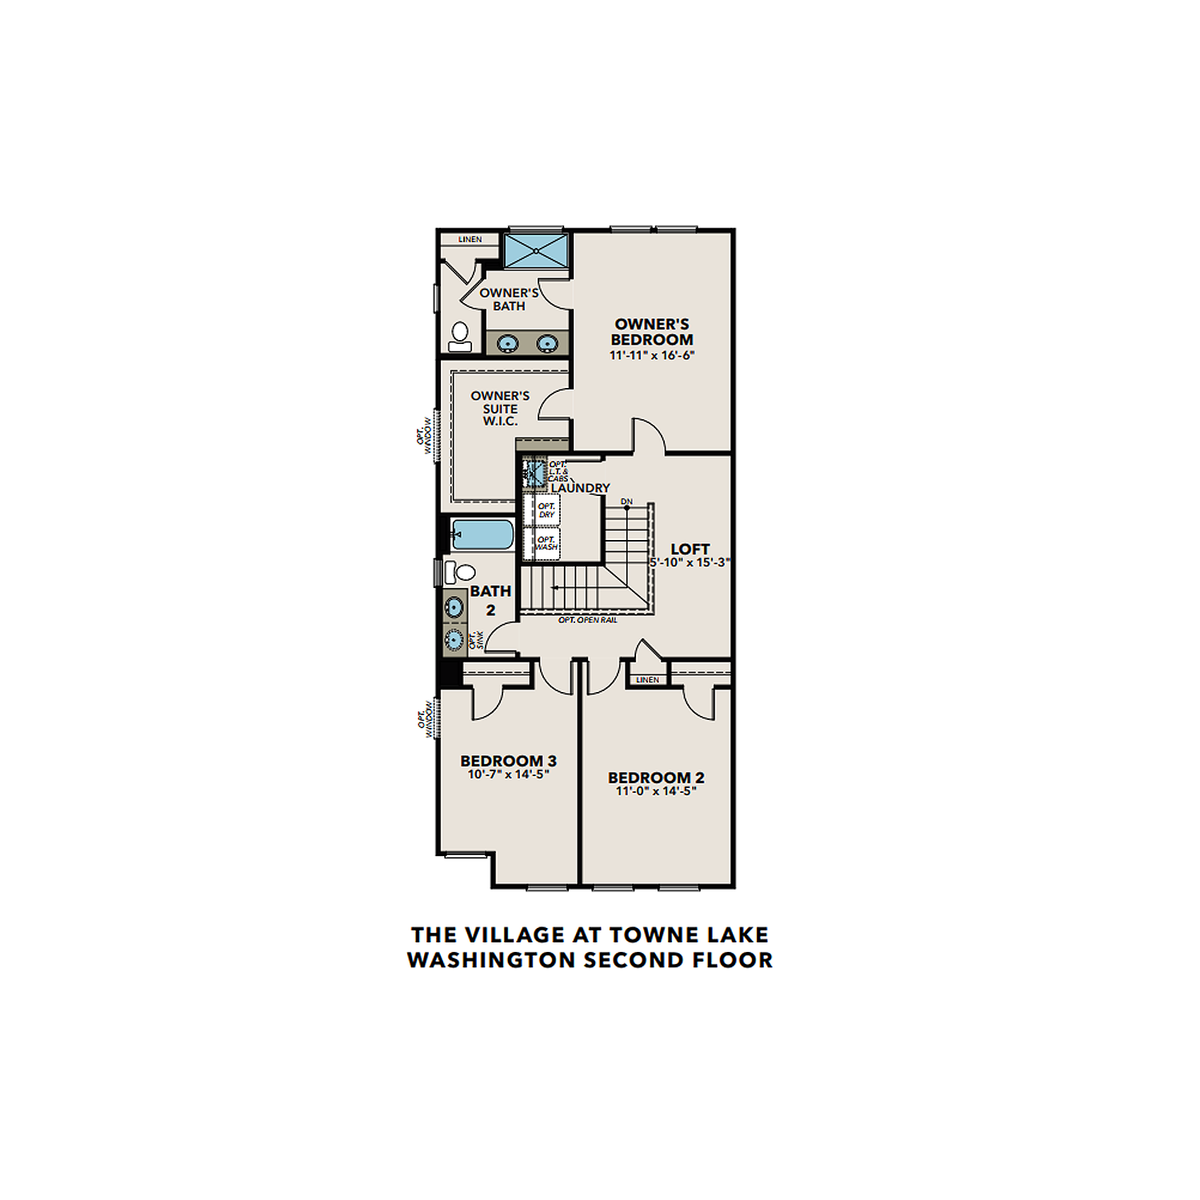 2 - The Washington F buildable floor plan layout in Davidson Homes' The Village at Towne Lake community.